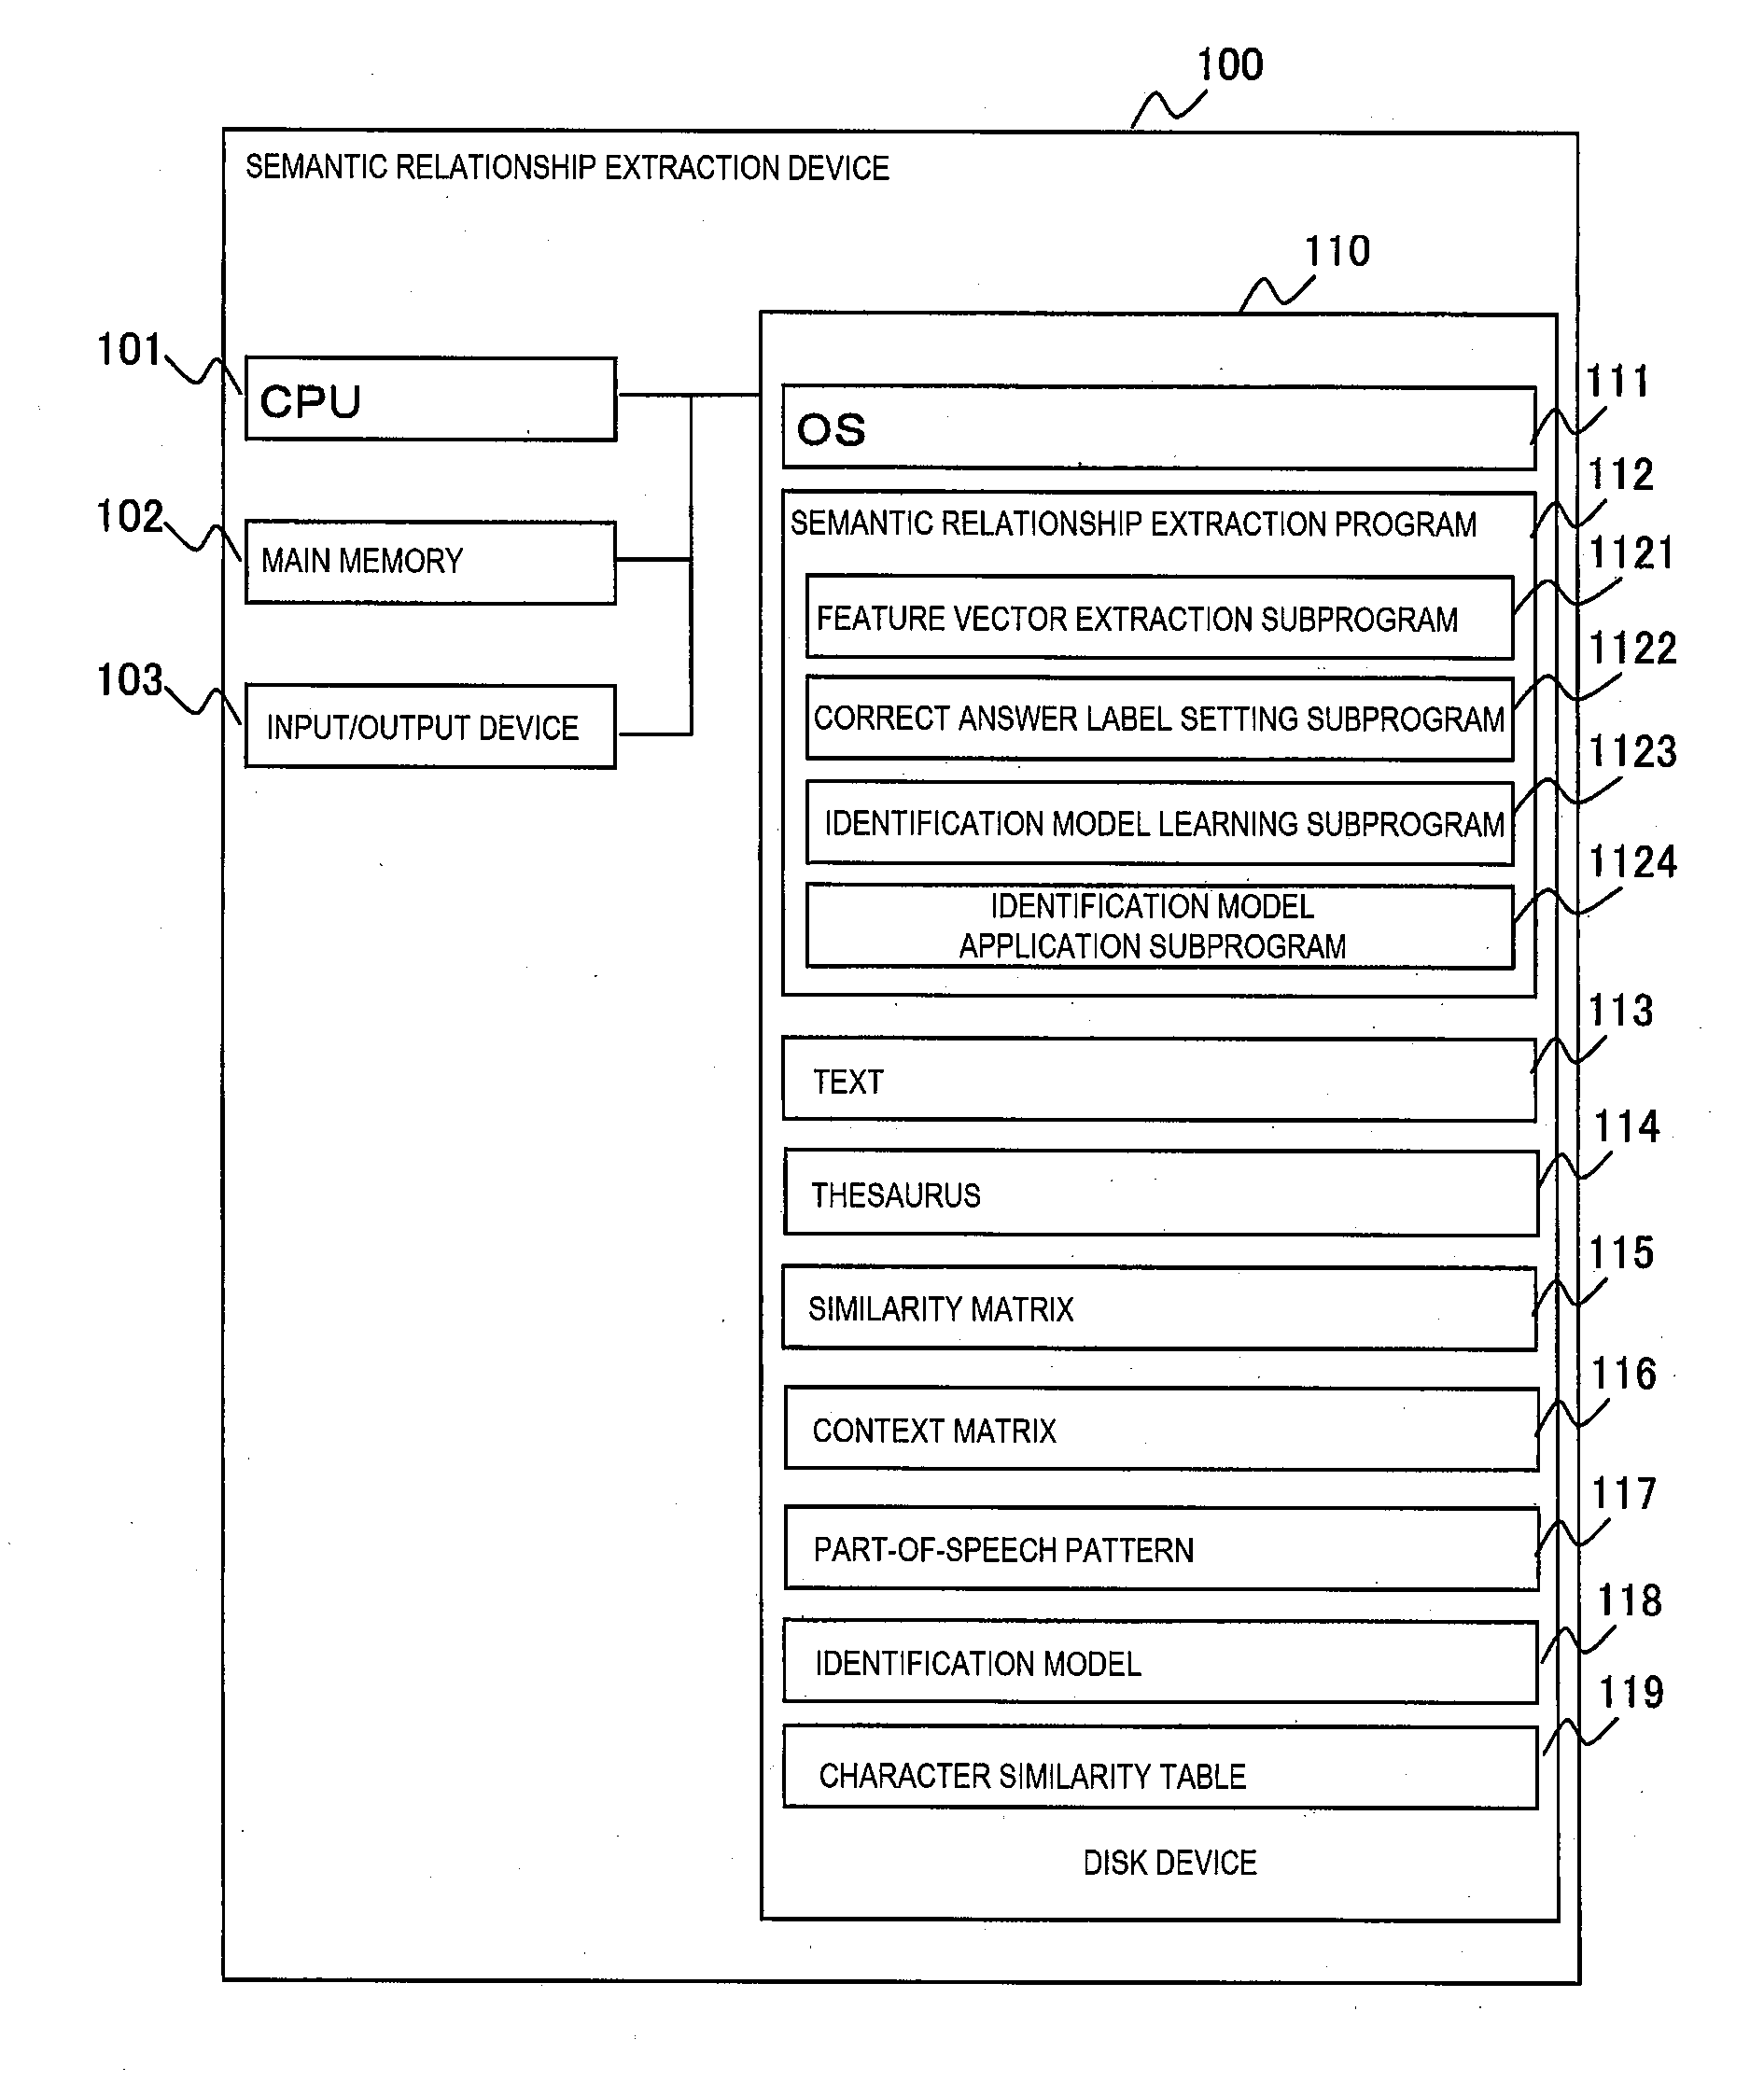 Word meaning relationship extraction device